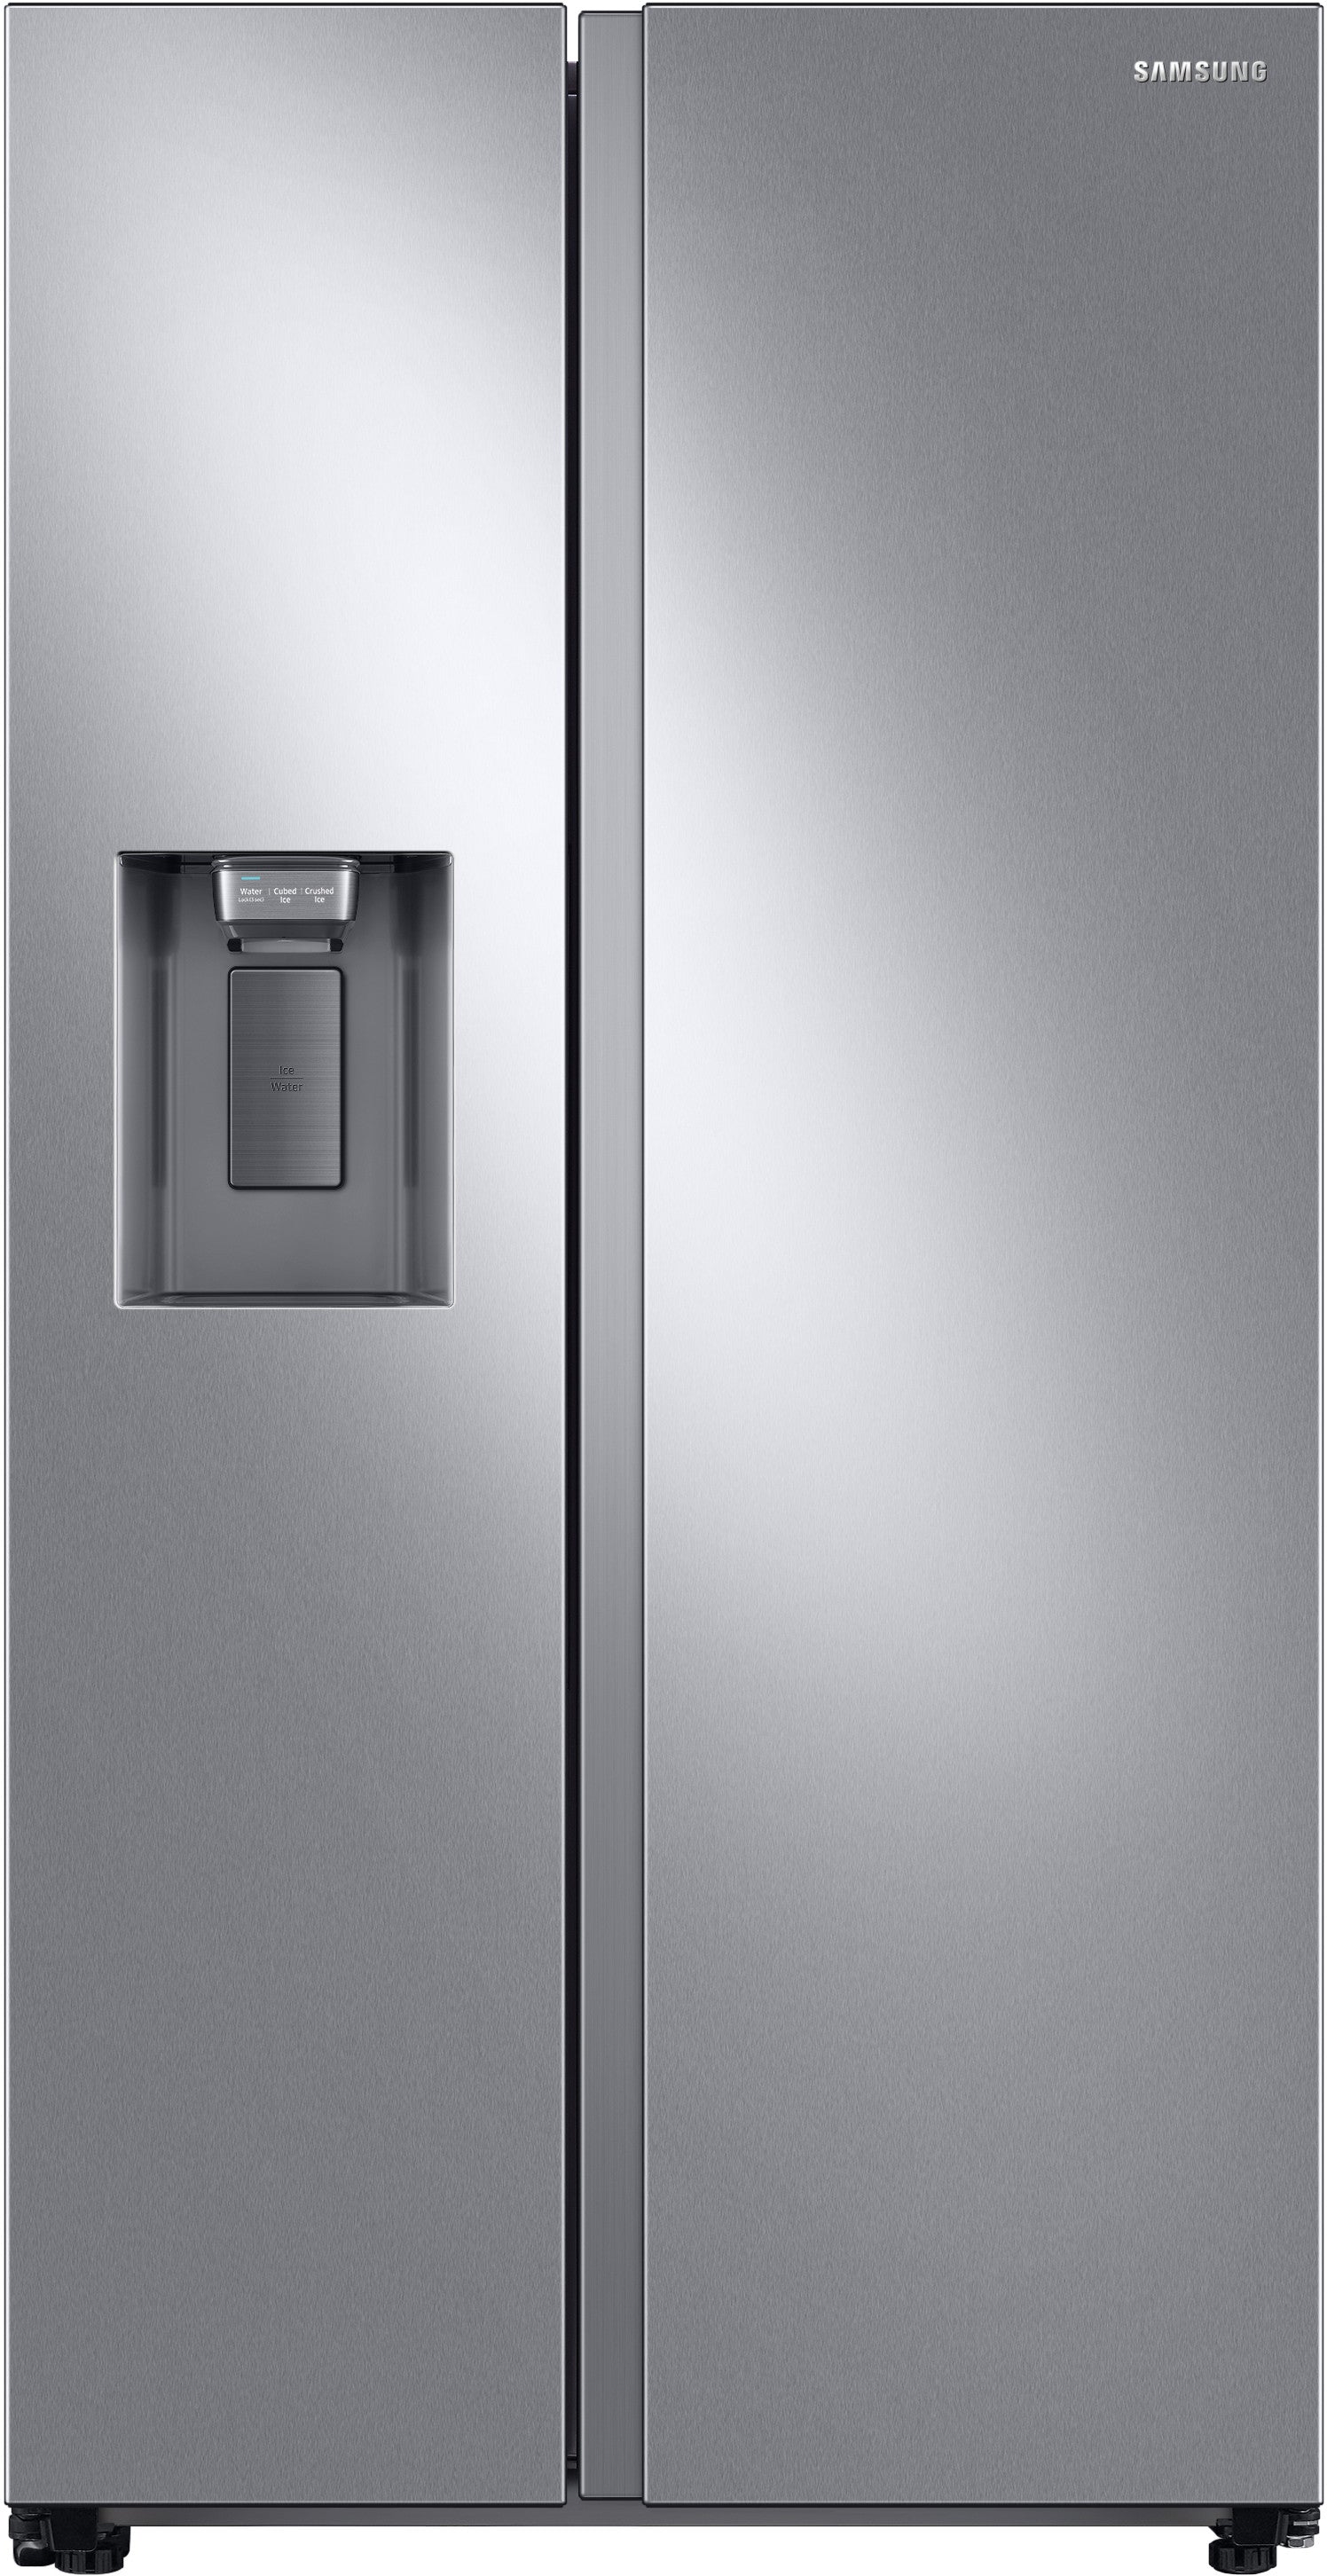 Samsung RS27T5200SR/AA 27.4 Cu. Ft. Large Capacity Side-by-side Refrigerator